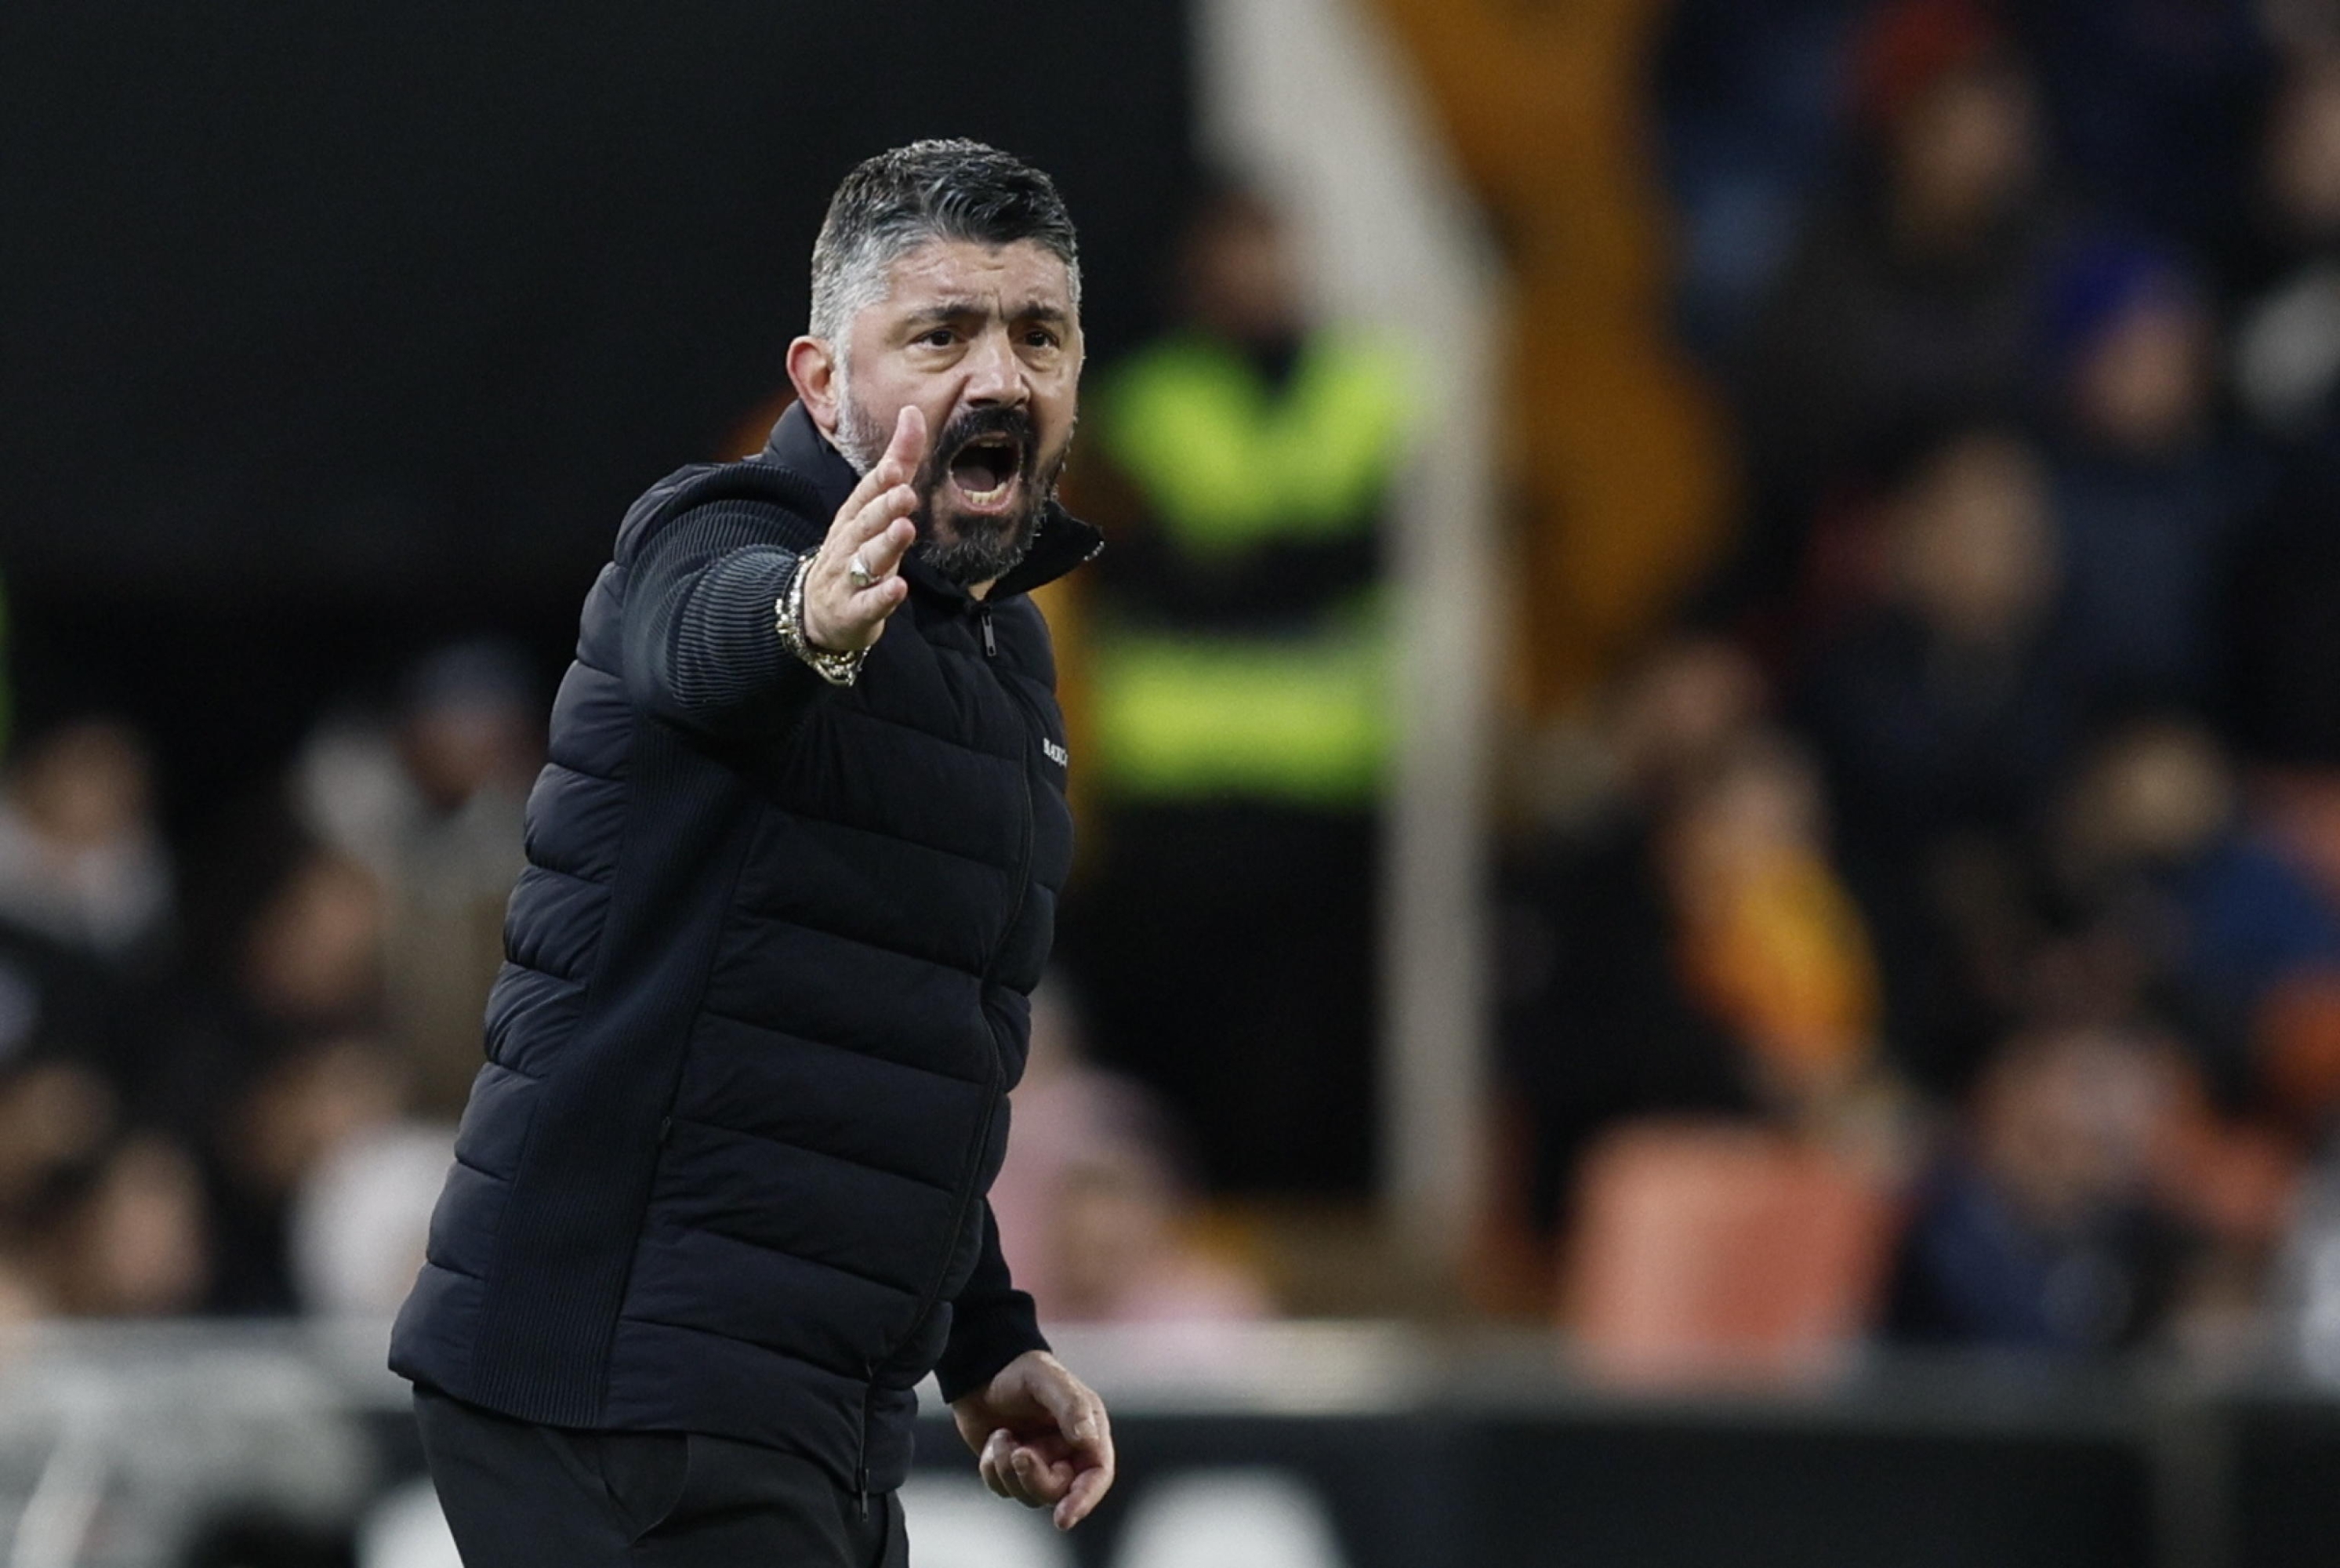 epa10440533 (FILE) - Valencia's head coach Gennaro Gattuso reacts during the Spanish LaLiga soccer match between Valencia CF and UD Almeria at Mestalla stadium in Valencia, eastern Spain, 23 January 2023 (reissued 30 January 2023). Valencia CF and Italian coach Gennaro Gattuso part ways by mutual consent after losing against Real Valladolid in the last match of Spanish LaLiga. Voro Gonzalez will be the new head coach of the club.  EPA/Biel Alino